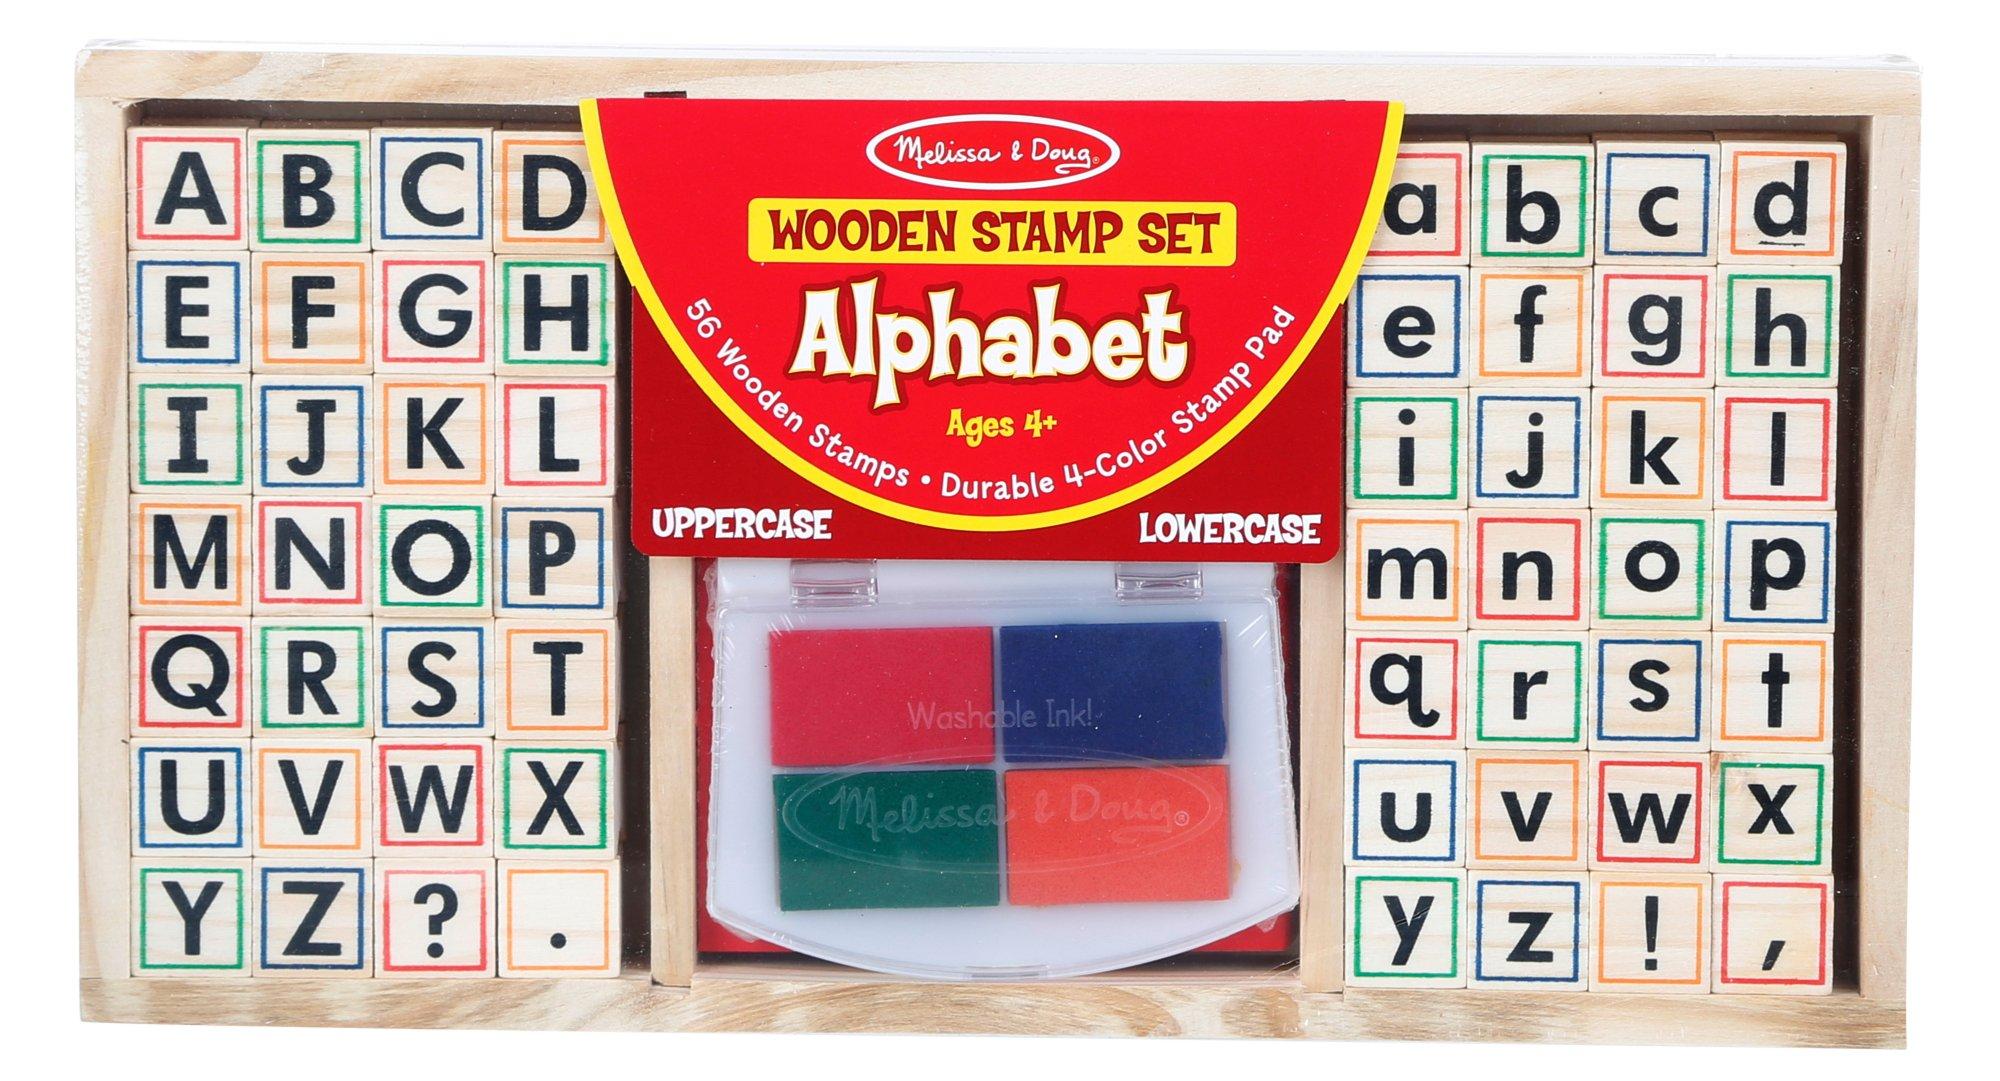 Melissa & Doug Wooden Alphabet Stamp Set - 56 Stamps With Lower-Case and  Capital Letters 